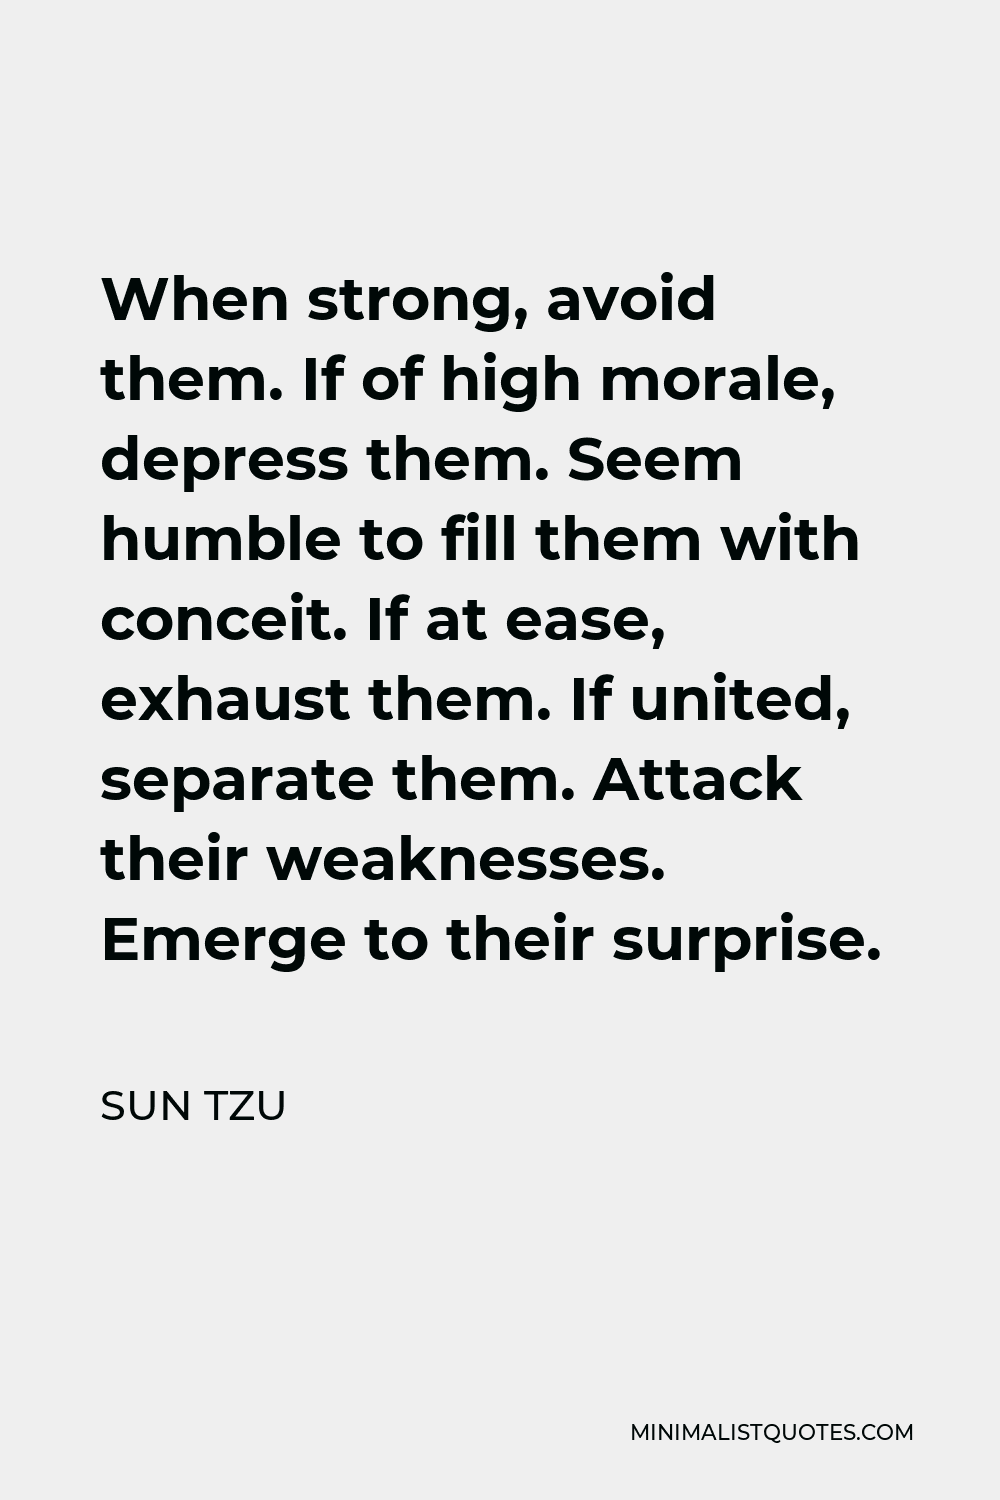 Sun Tzu Quote - When strong, avoid them. If of high morale, depress them. Seem humble to fill them with conceit. If at ease, exhaust them. If united, separate them. Attack their weaknesses. Emerge to their surprise.